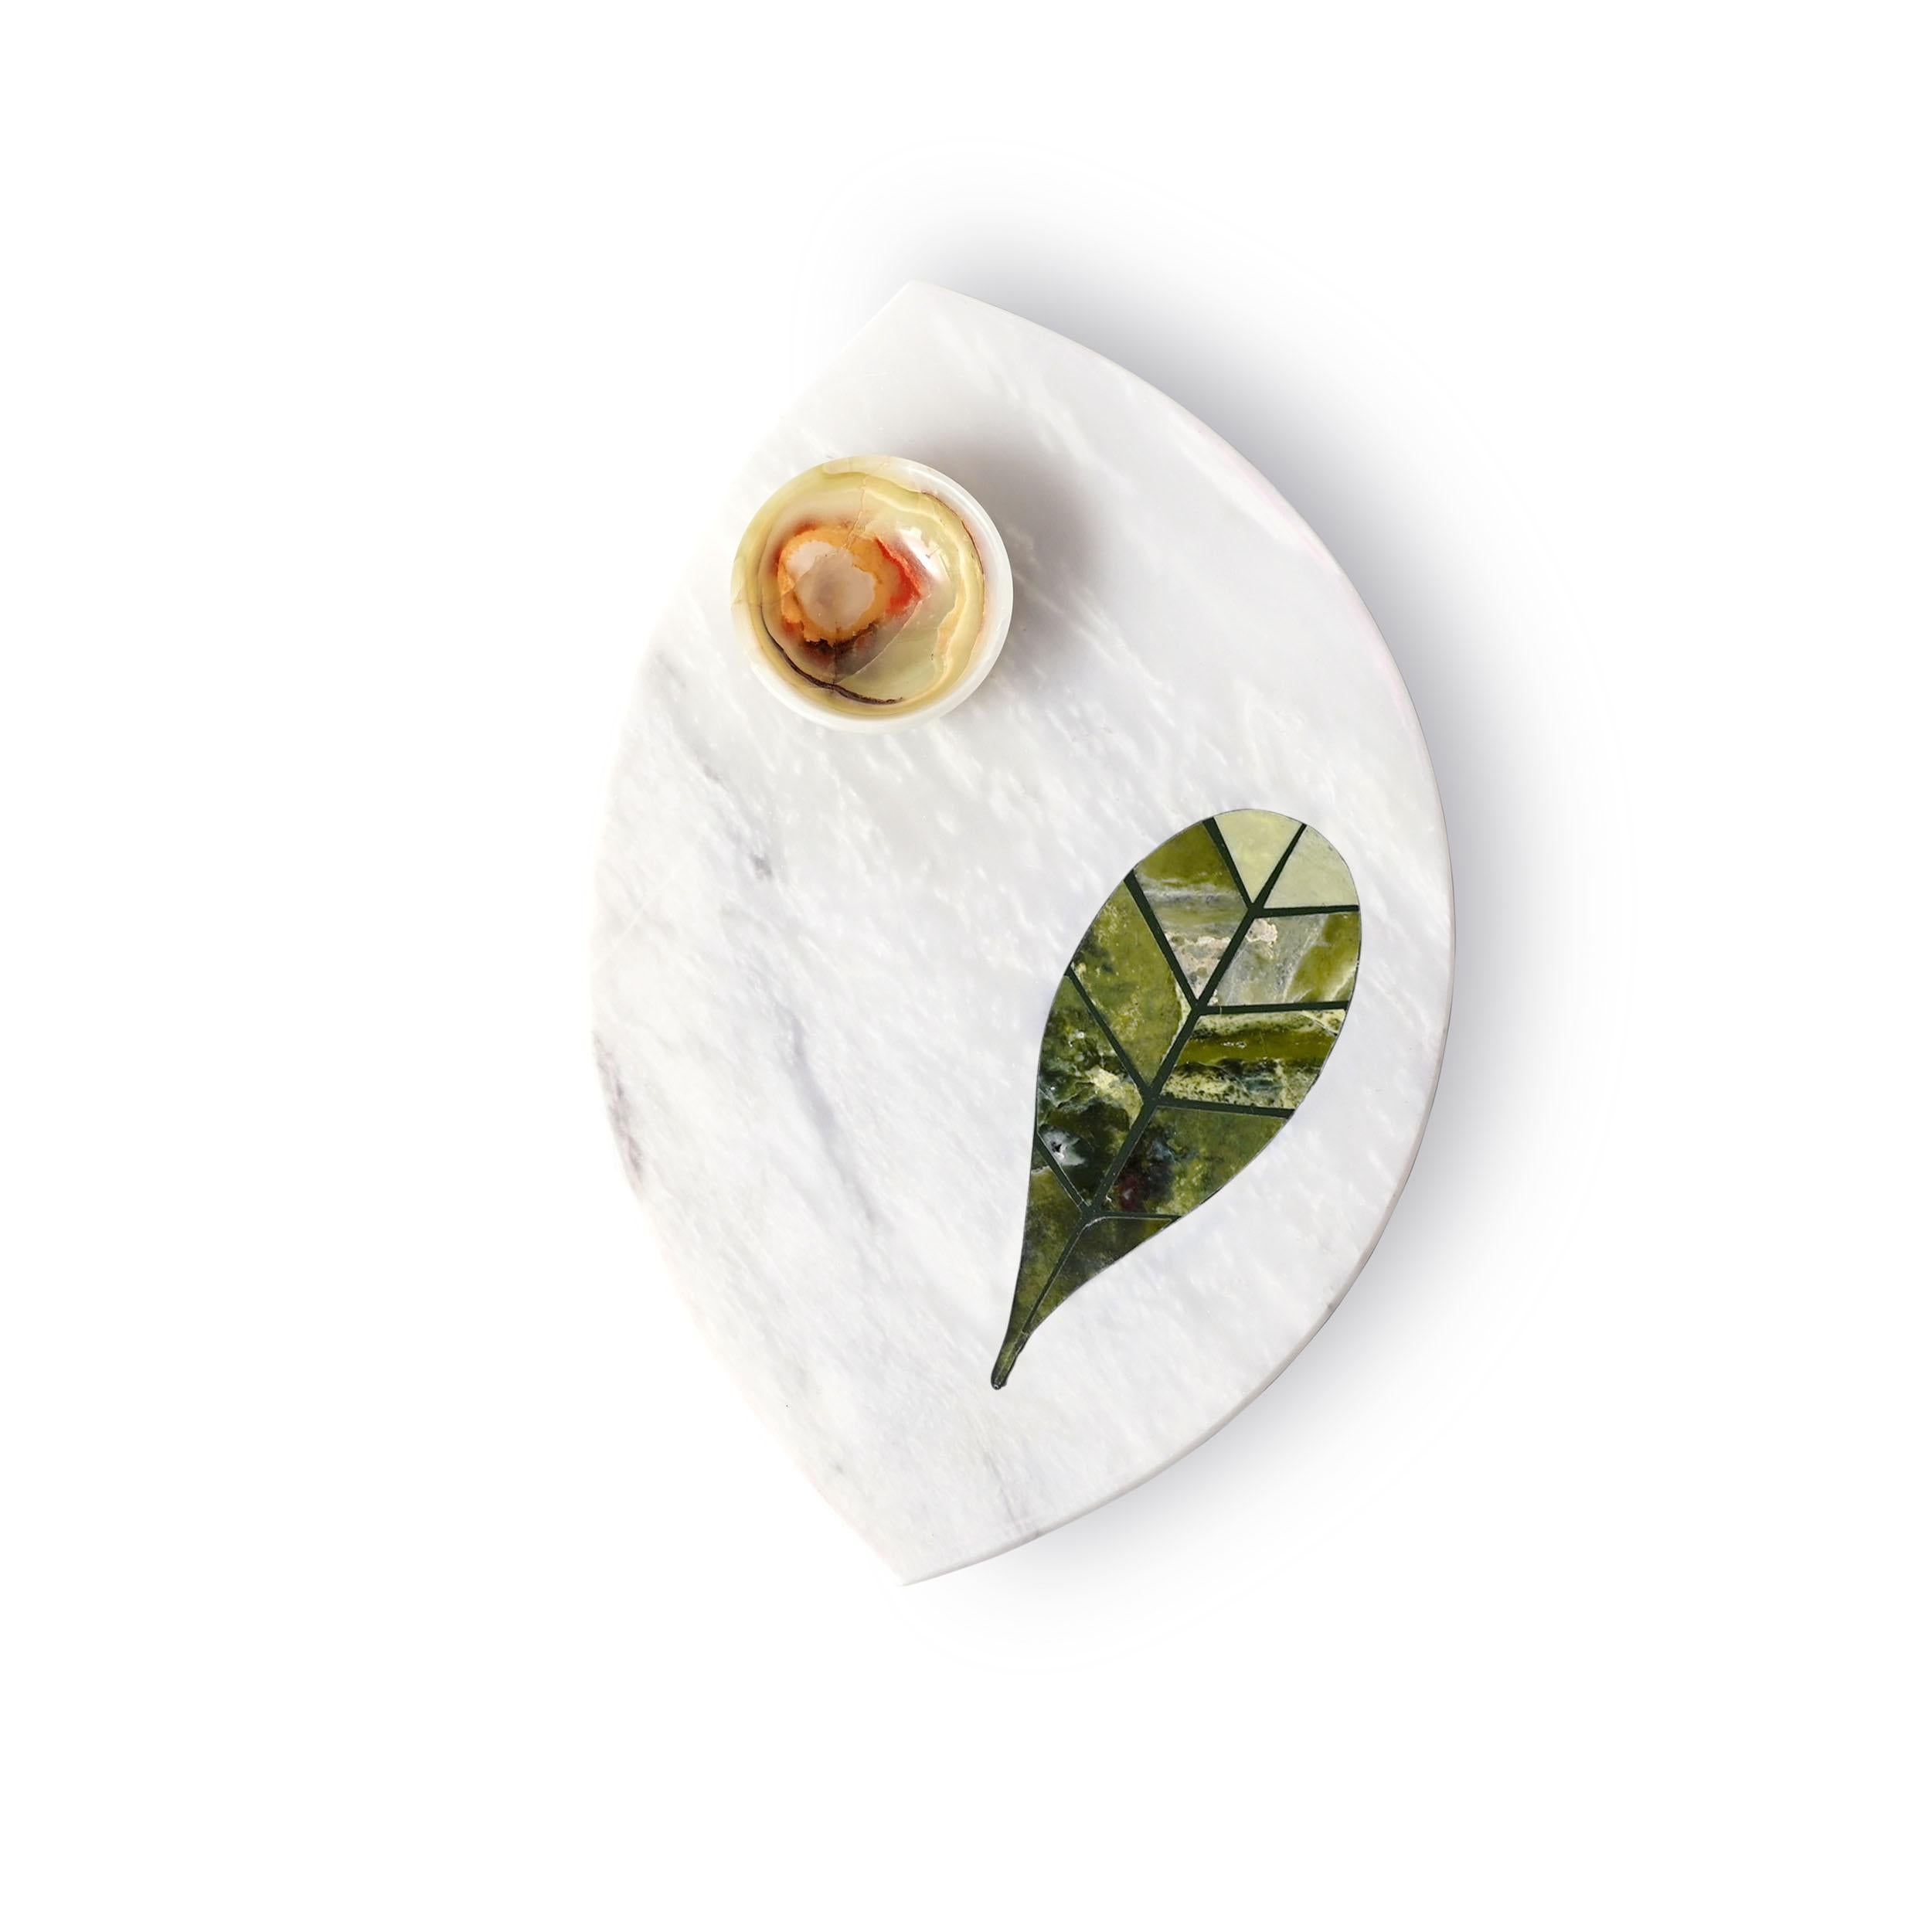 Lush platter II by Studio Lel
Dimensions: D35.6 x H22.8 x H2.5 cm
Materials: Serpentine, Marble

These are handmade from semiprecious stone and marble in a small artisanal workshop. Please note that variations and slight imperfections are part